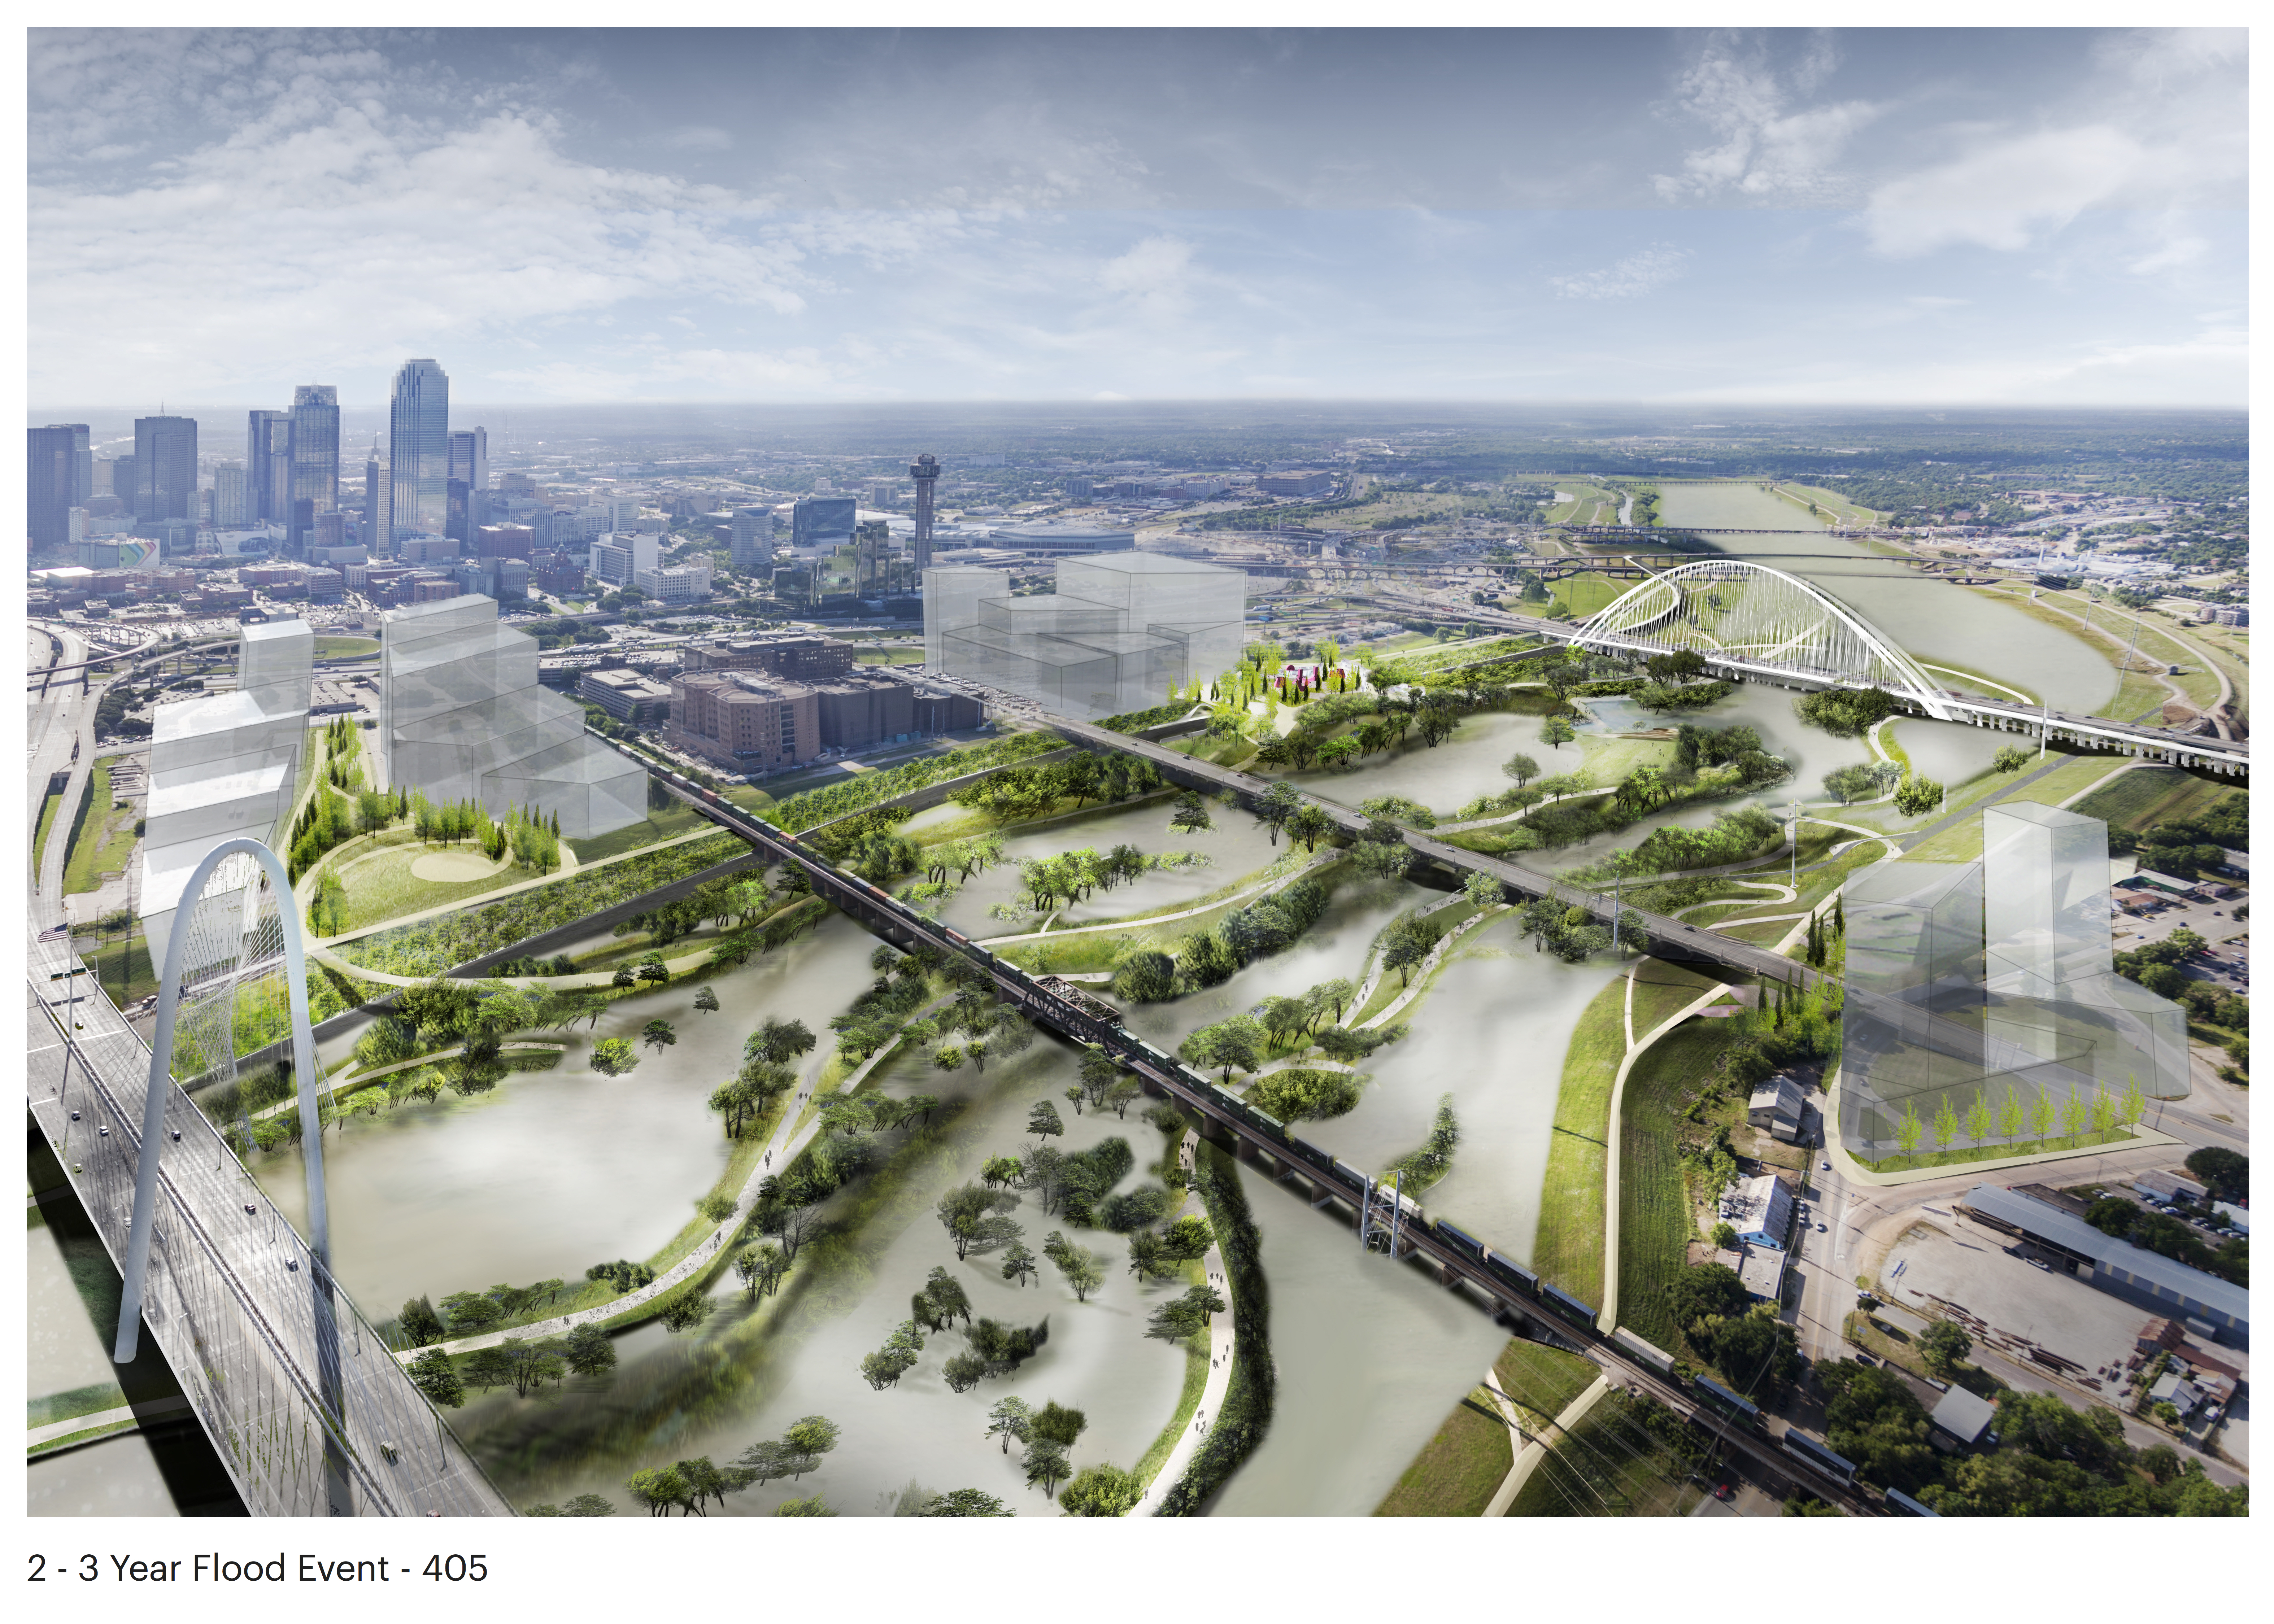 Trinity River floodplain set to become one of nation’s largest and greenest urban parks